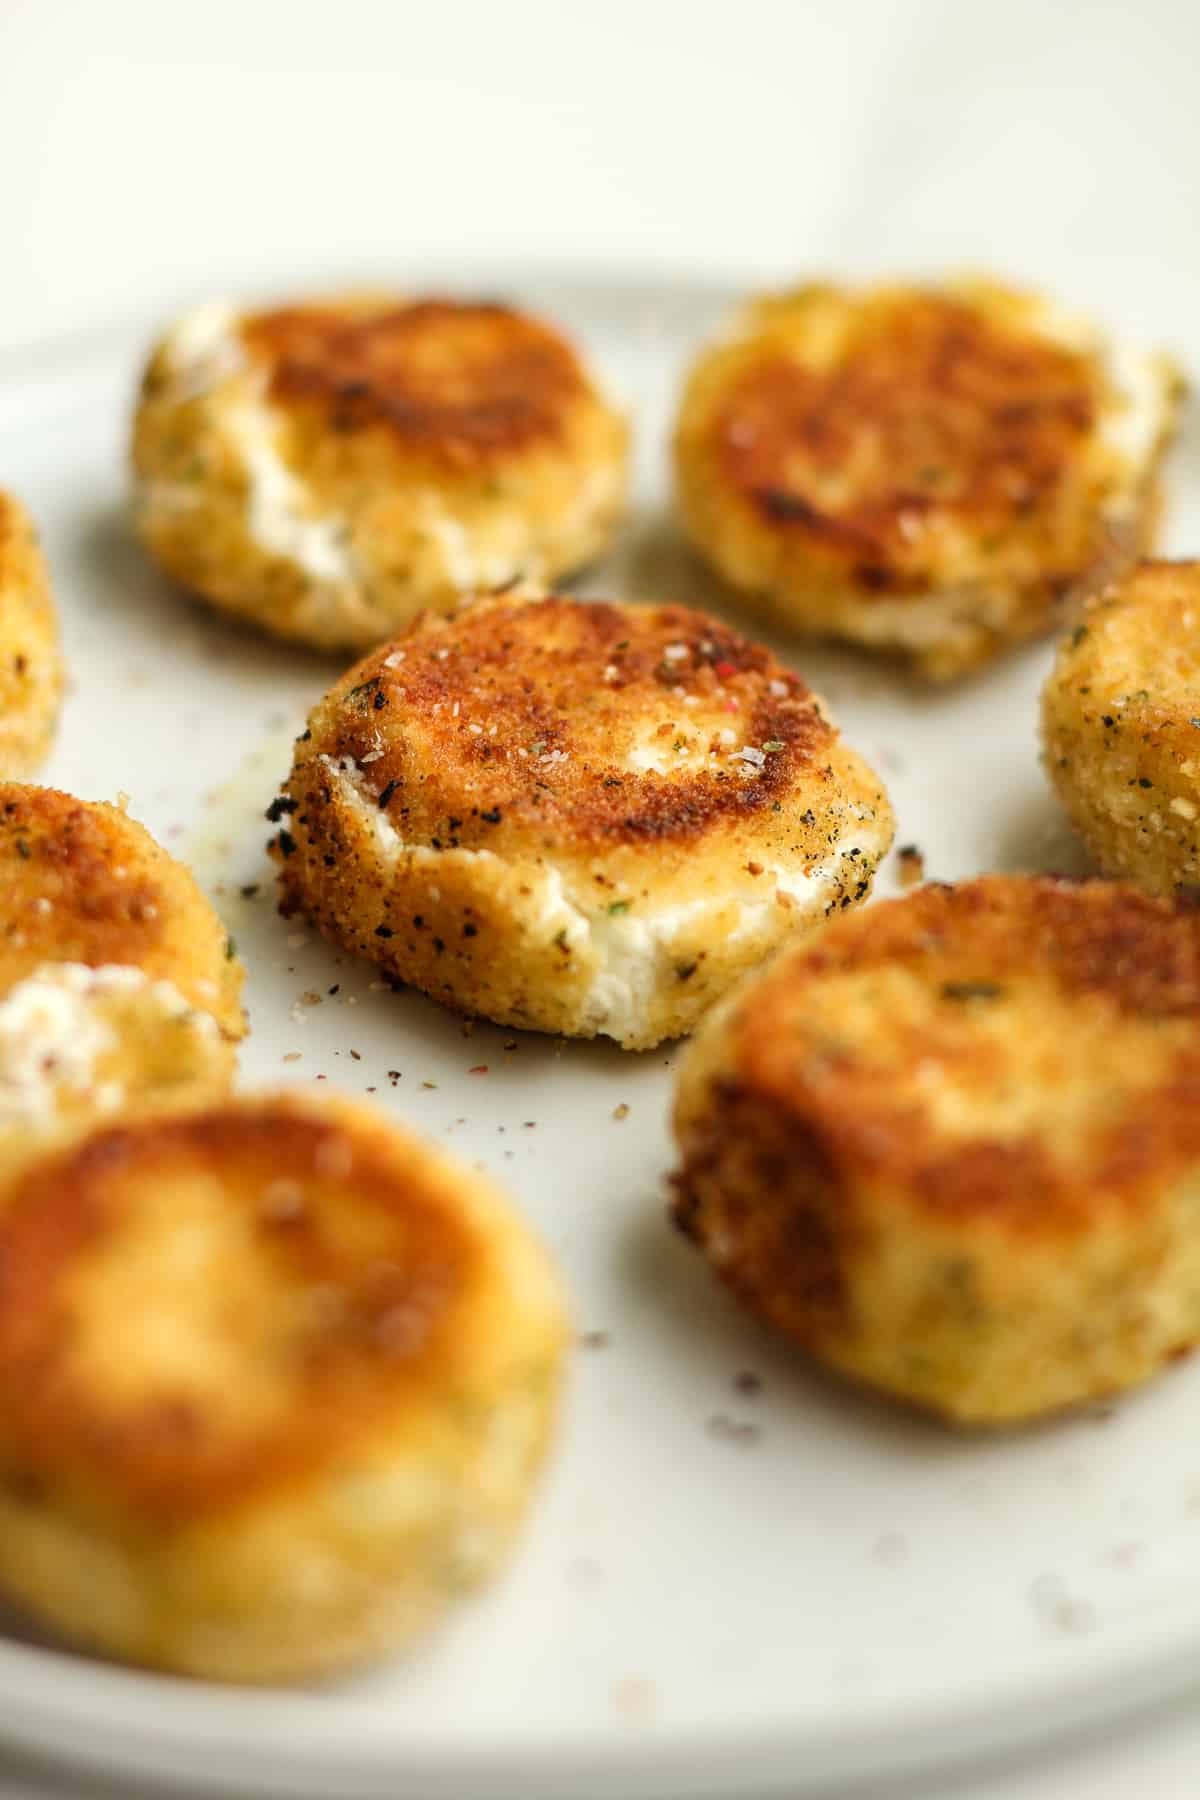 Side view of a plate of fried goat cheese.